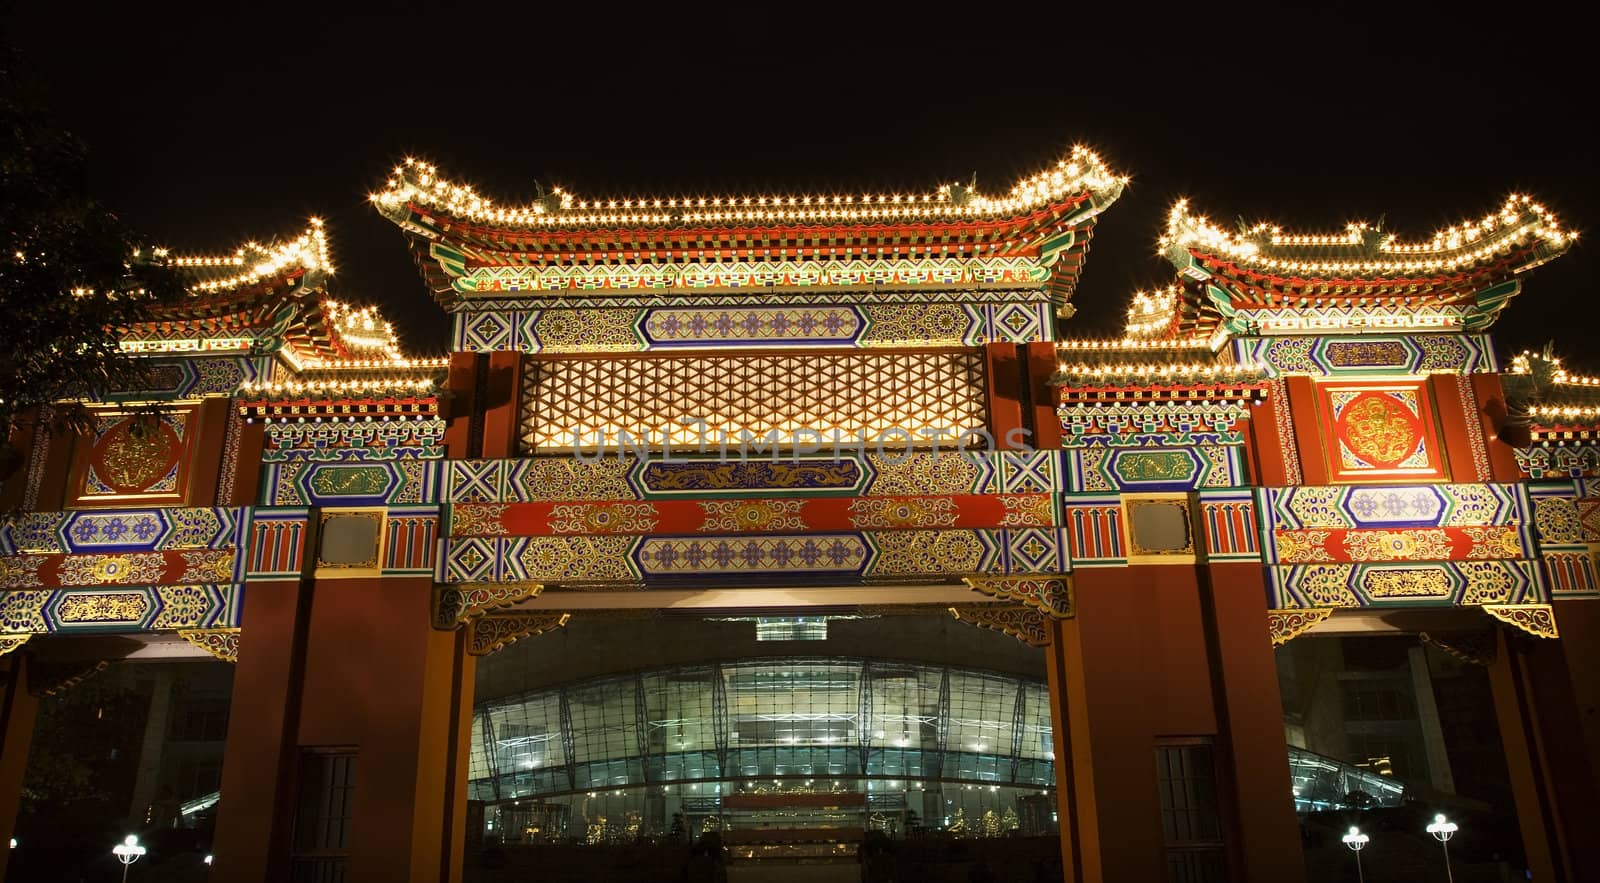 Chinese Gate, Renmin "People's" Square, Great Hall of the People, Chongqing, Sichuan, China Night Shot